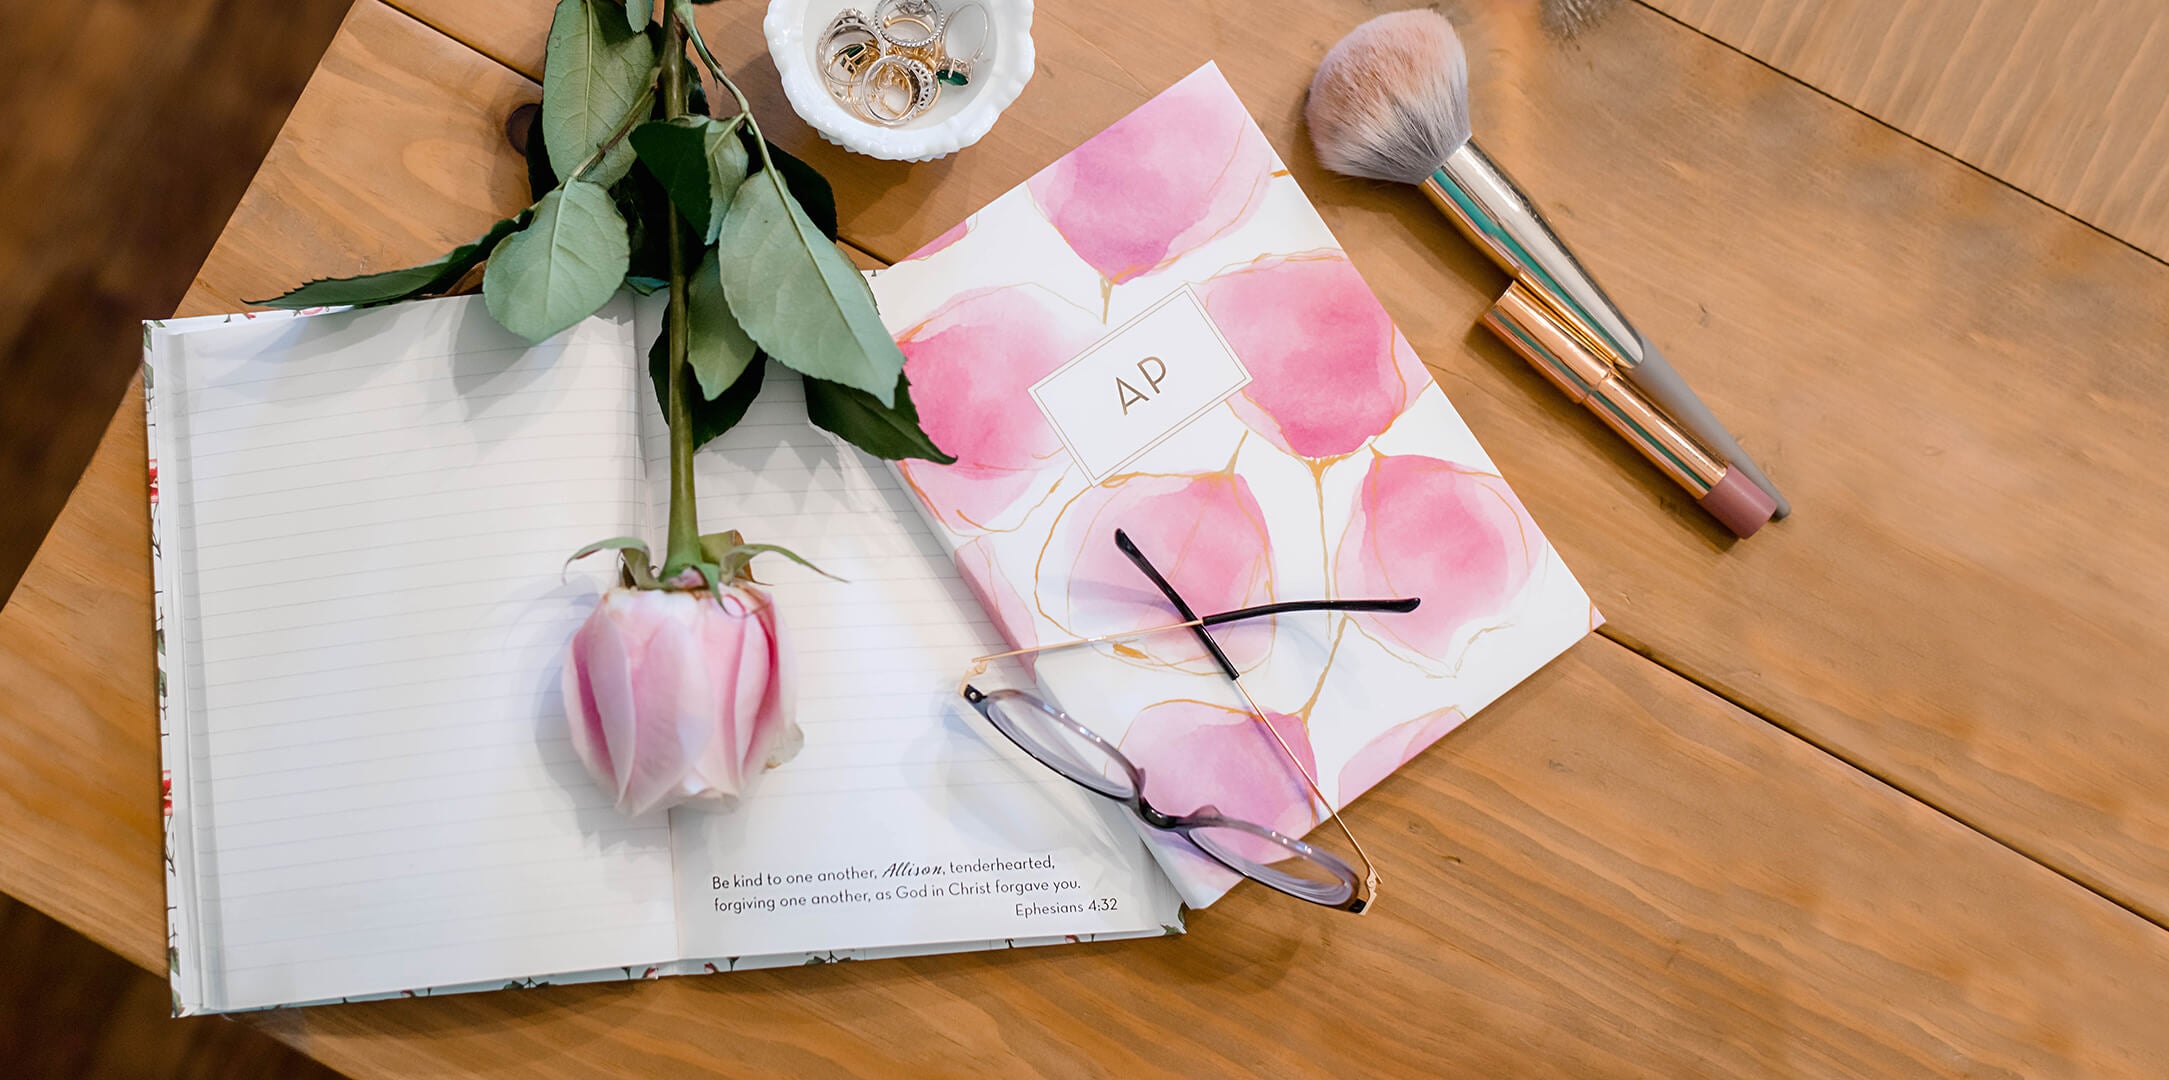 The perfect Mother's Day gift, personalized scripture journals and planners.  Gift the gift of His words. Made in the USA with over 6500 five star reviews.